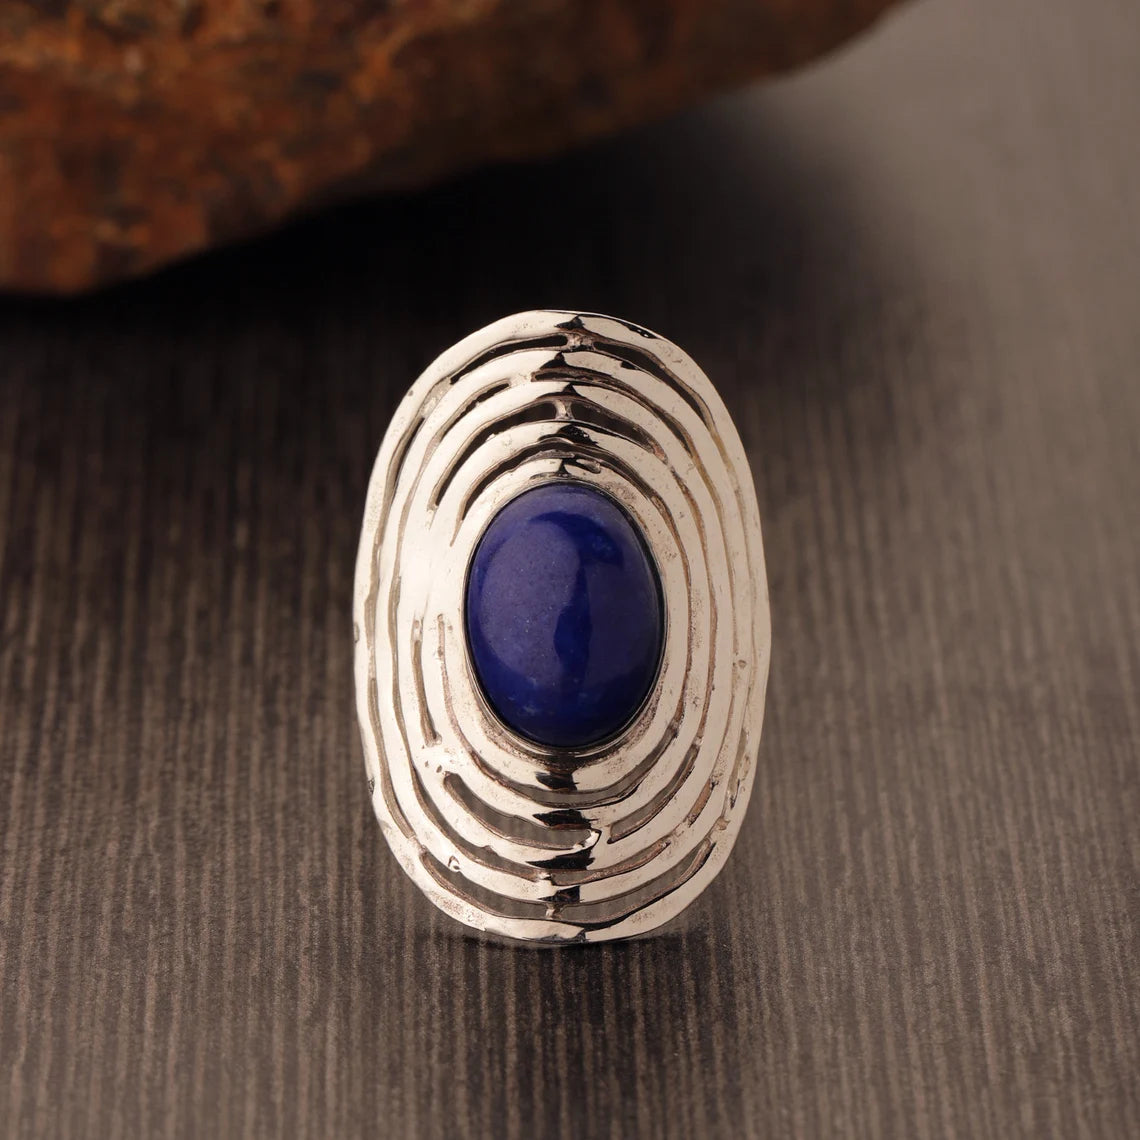 Blue Lapis Lazuli Ring in 925 Sterling Silver